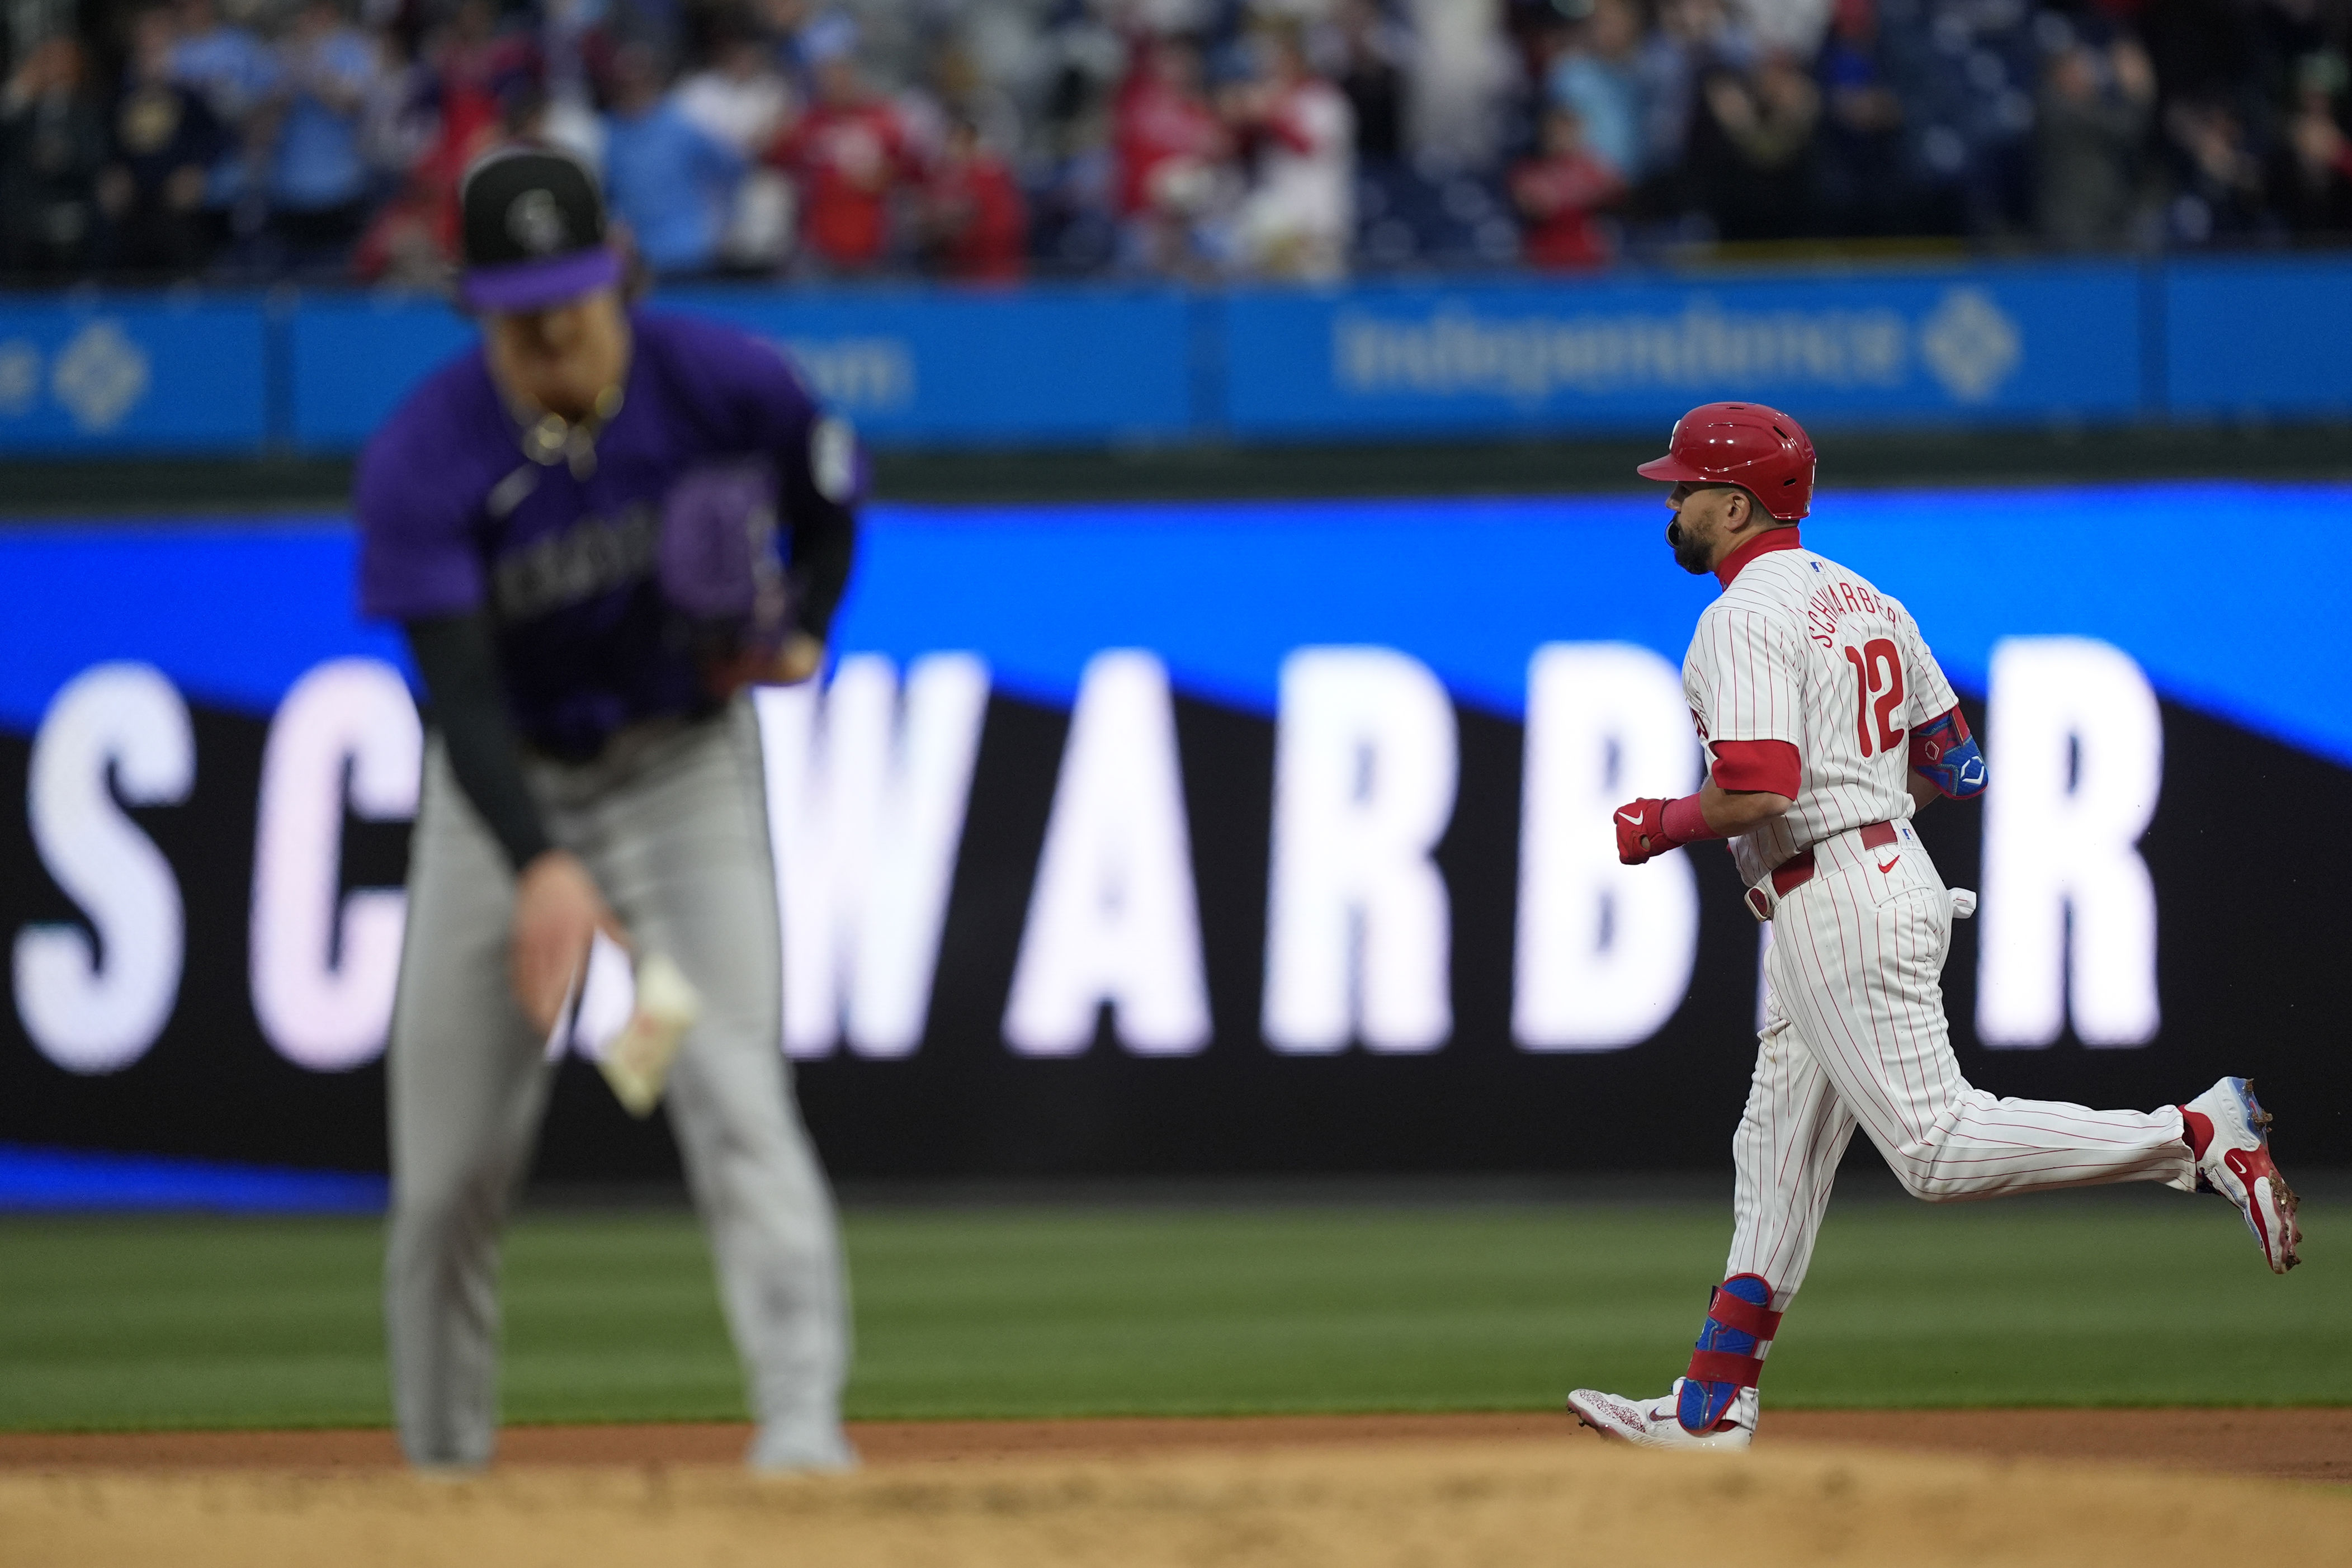 schwarber homers twice and sánchez pitches 6 strong innings as phillies finish sweep of rockies